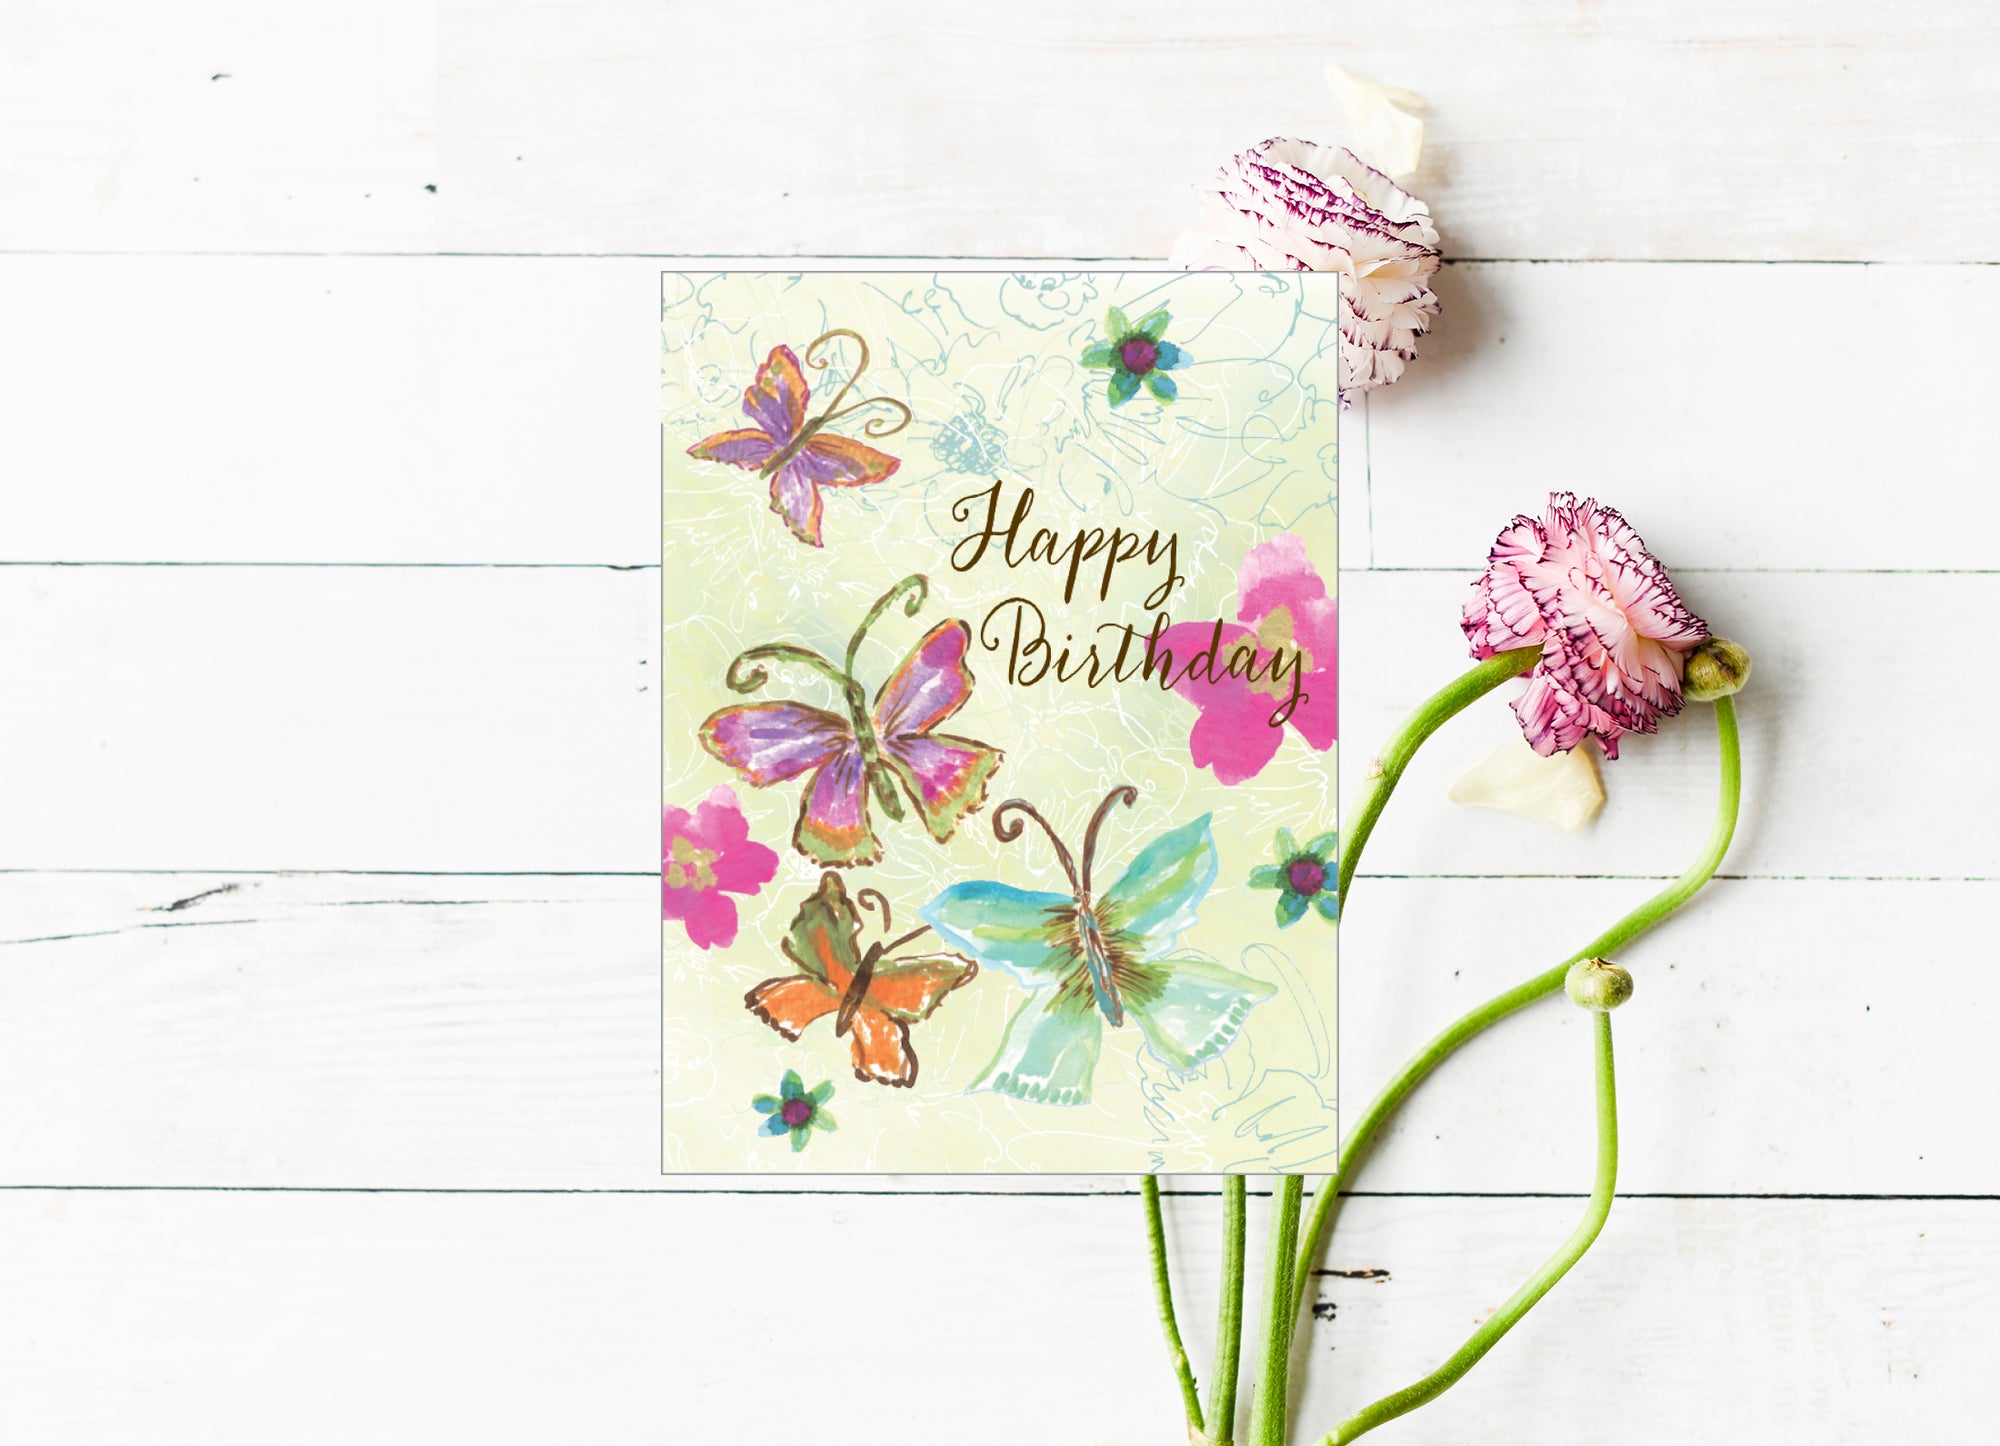 Four Butterfly Birthday Card - Dreams After All